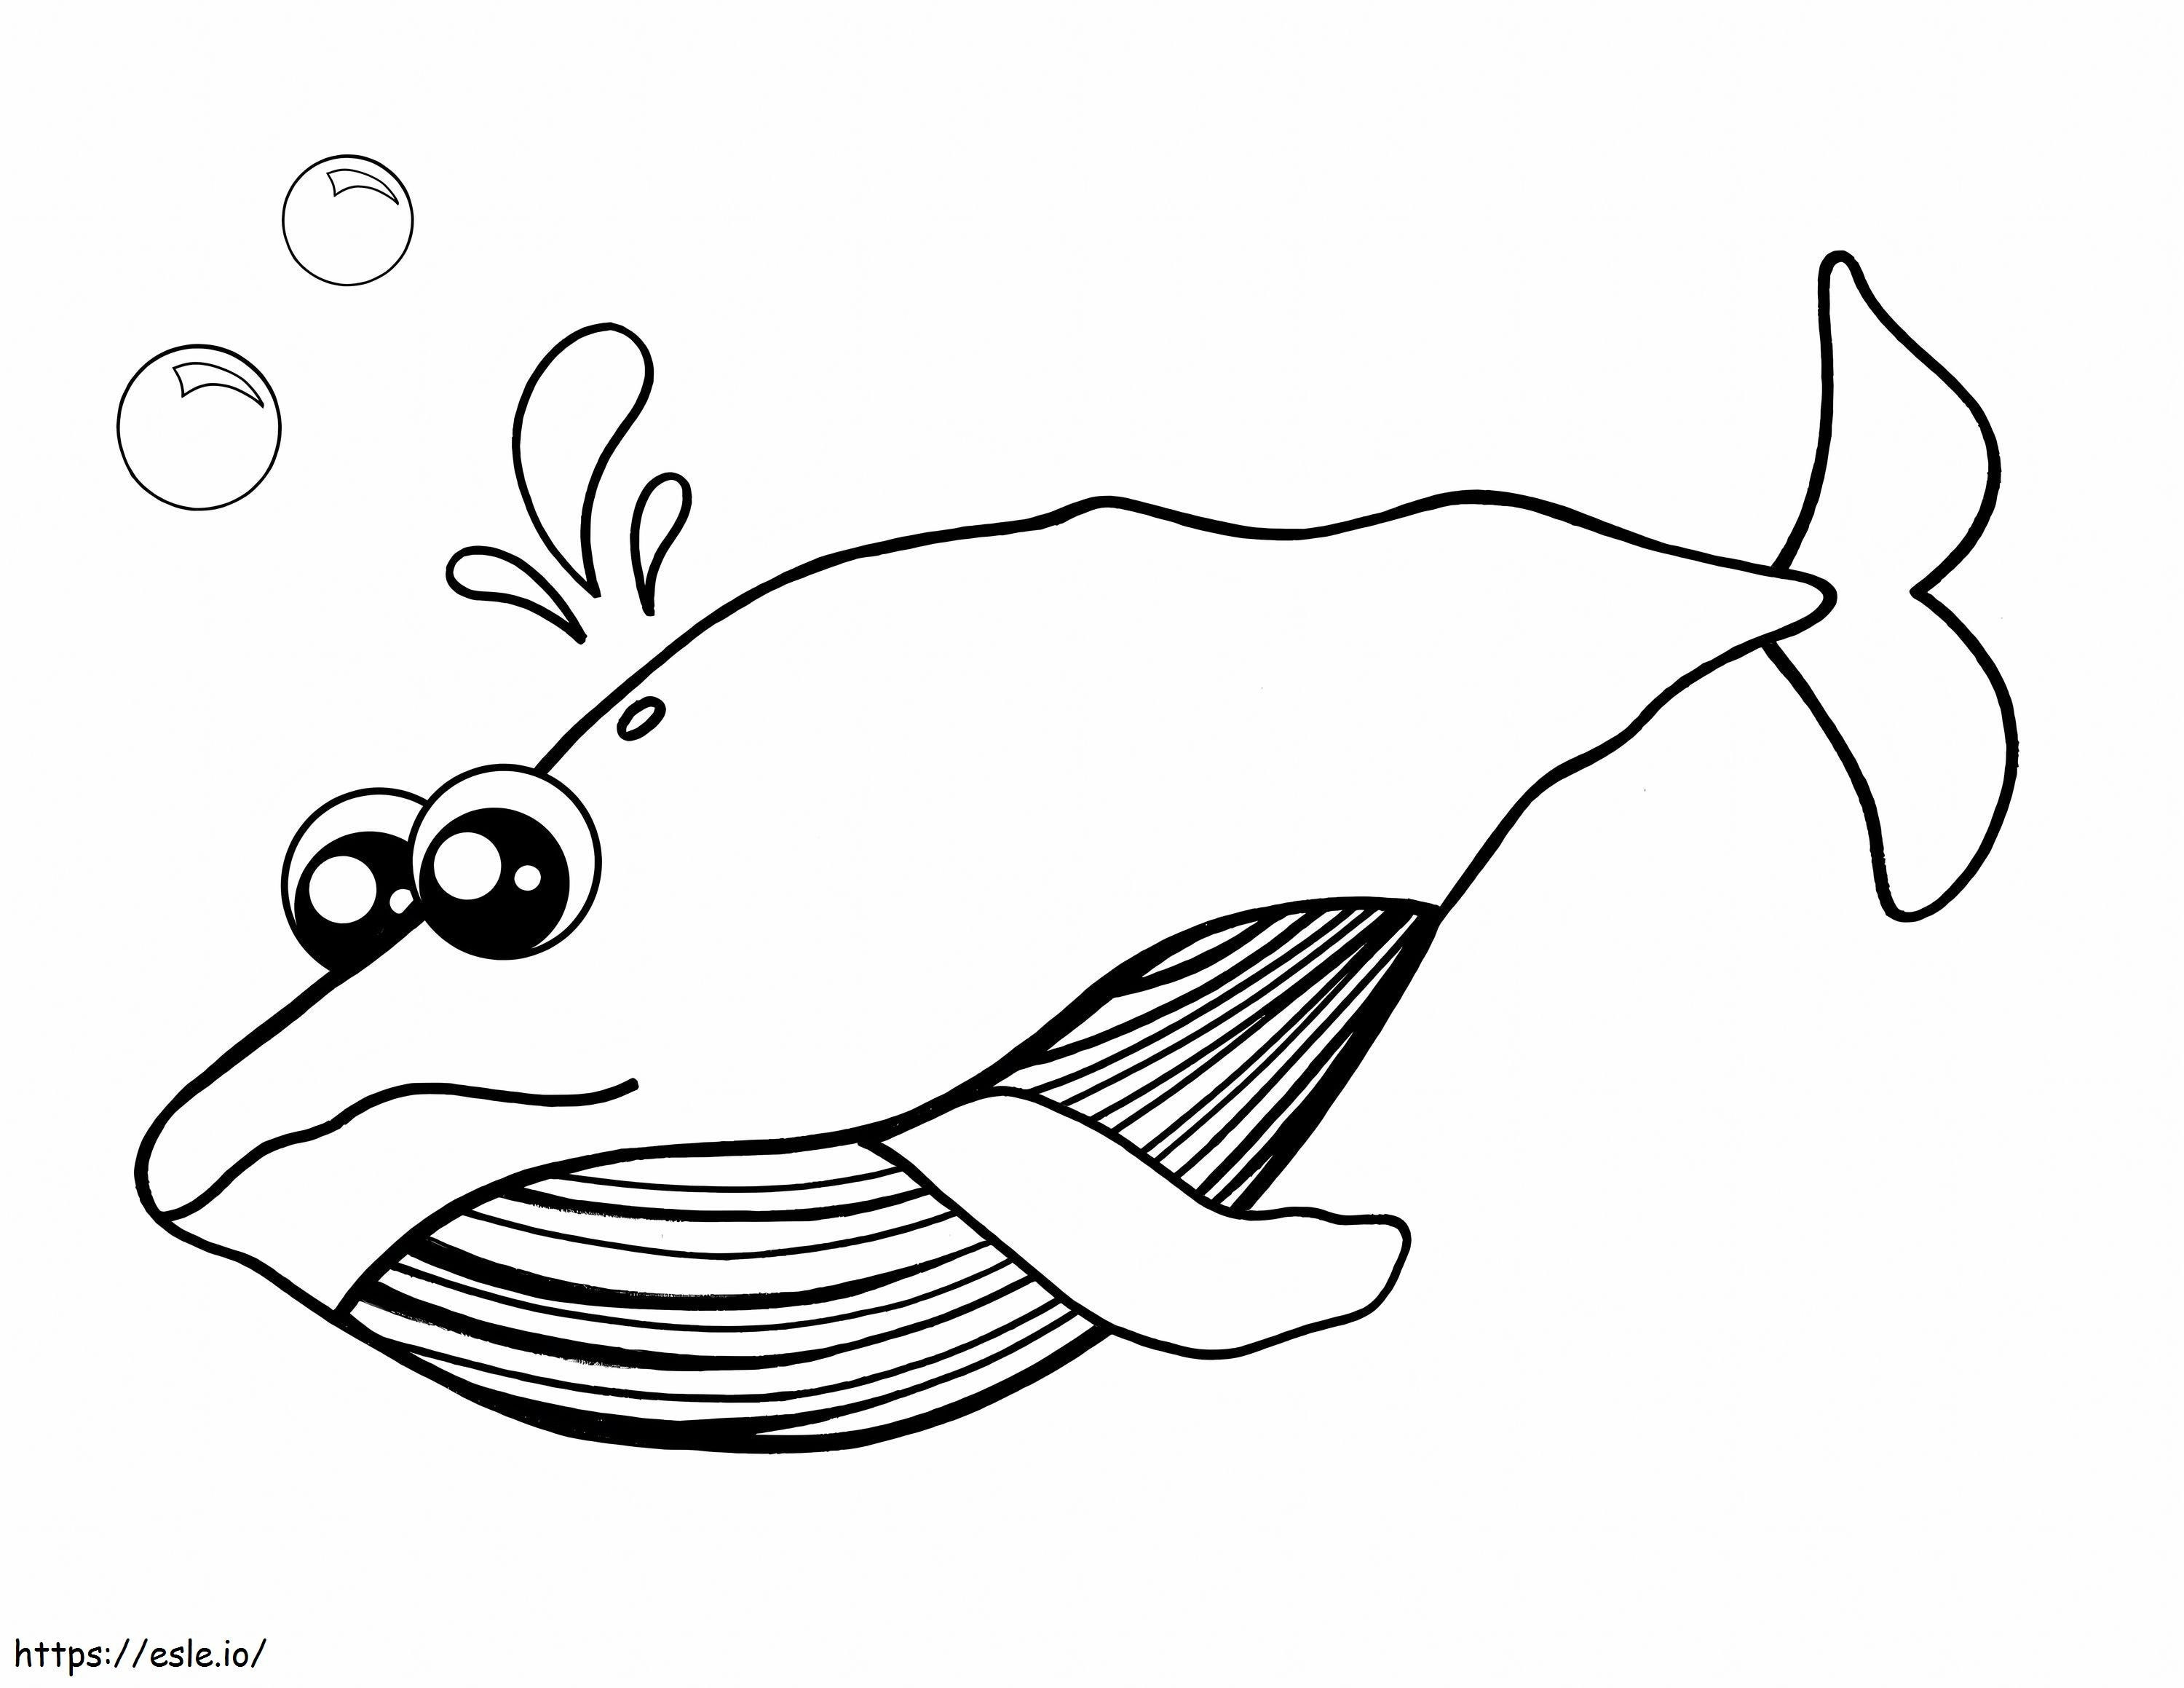 Perfect Whale coloring page